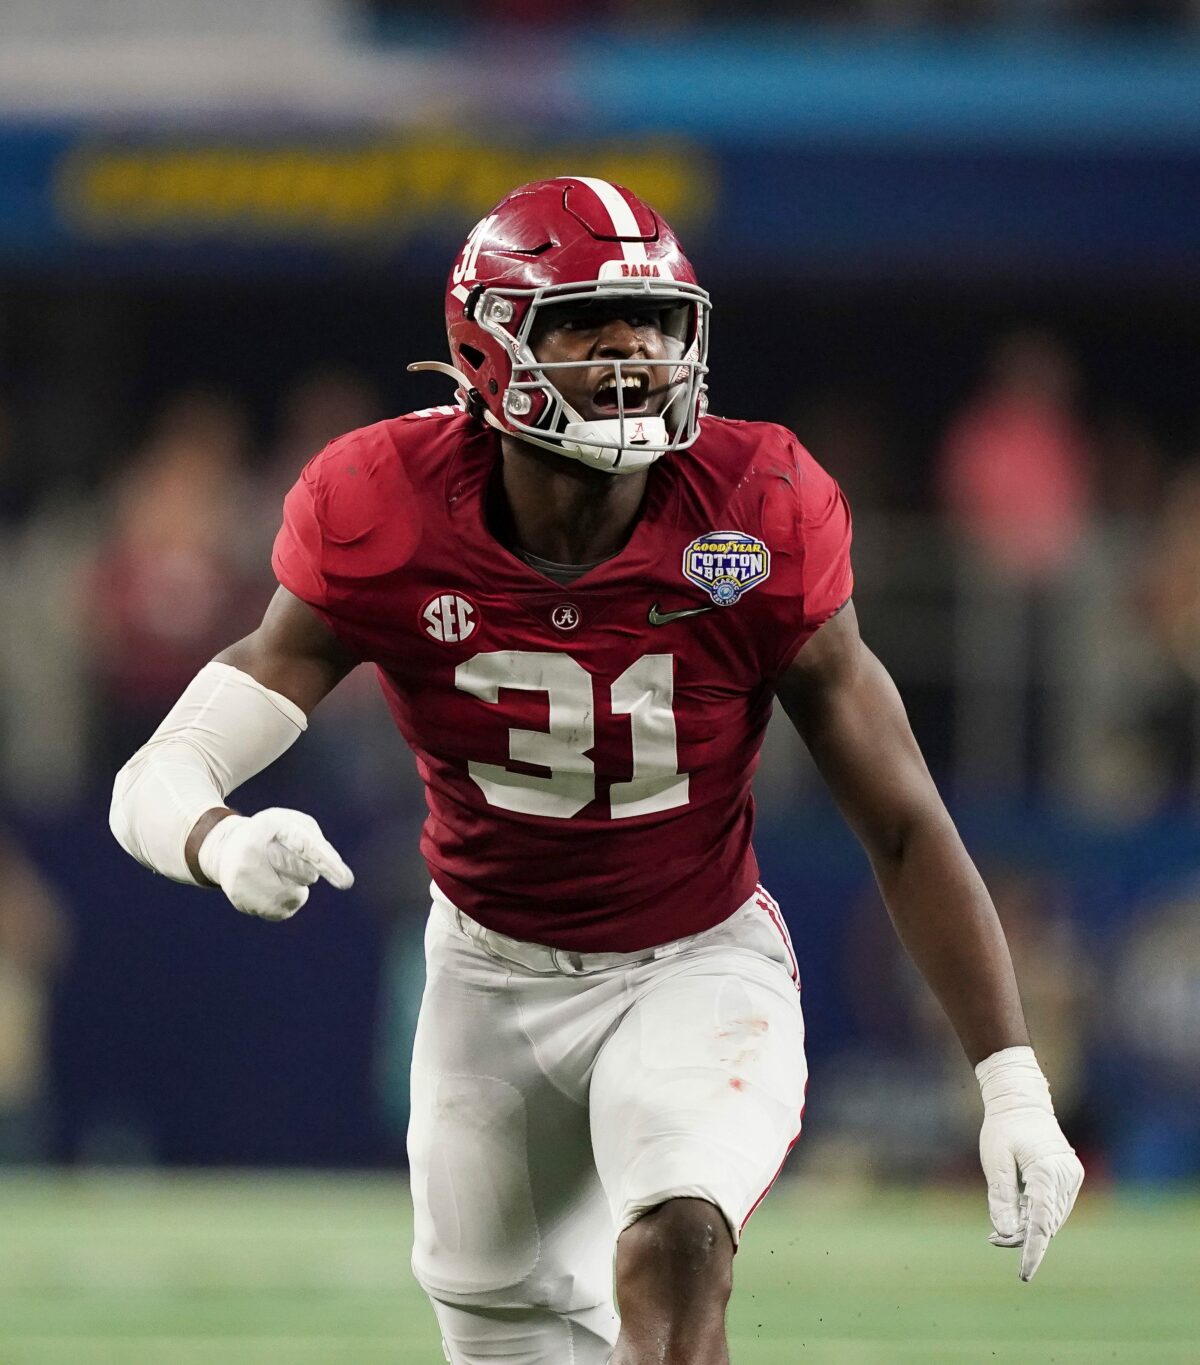 Alabama’s linebacker room poised to be one of the best in the nation in 2022